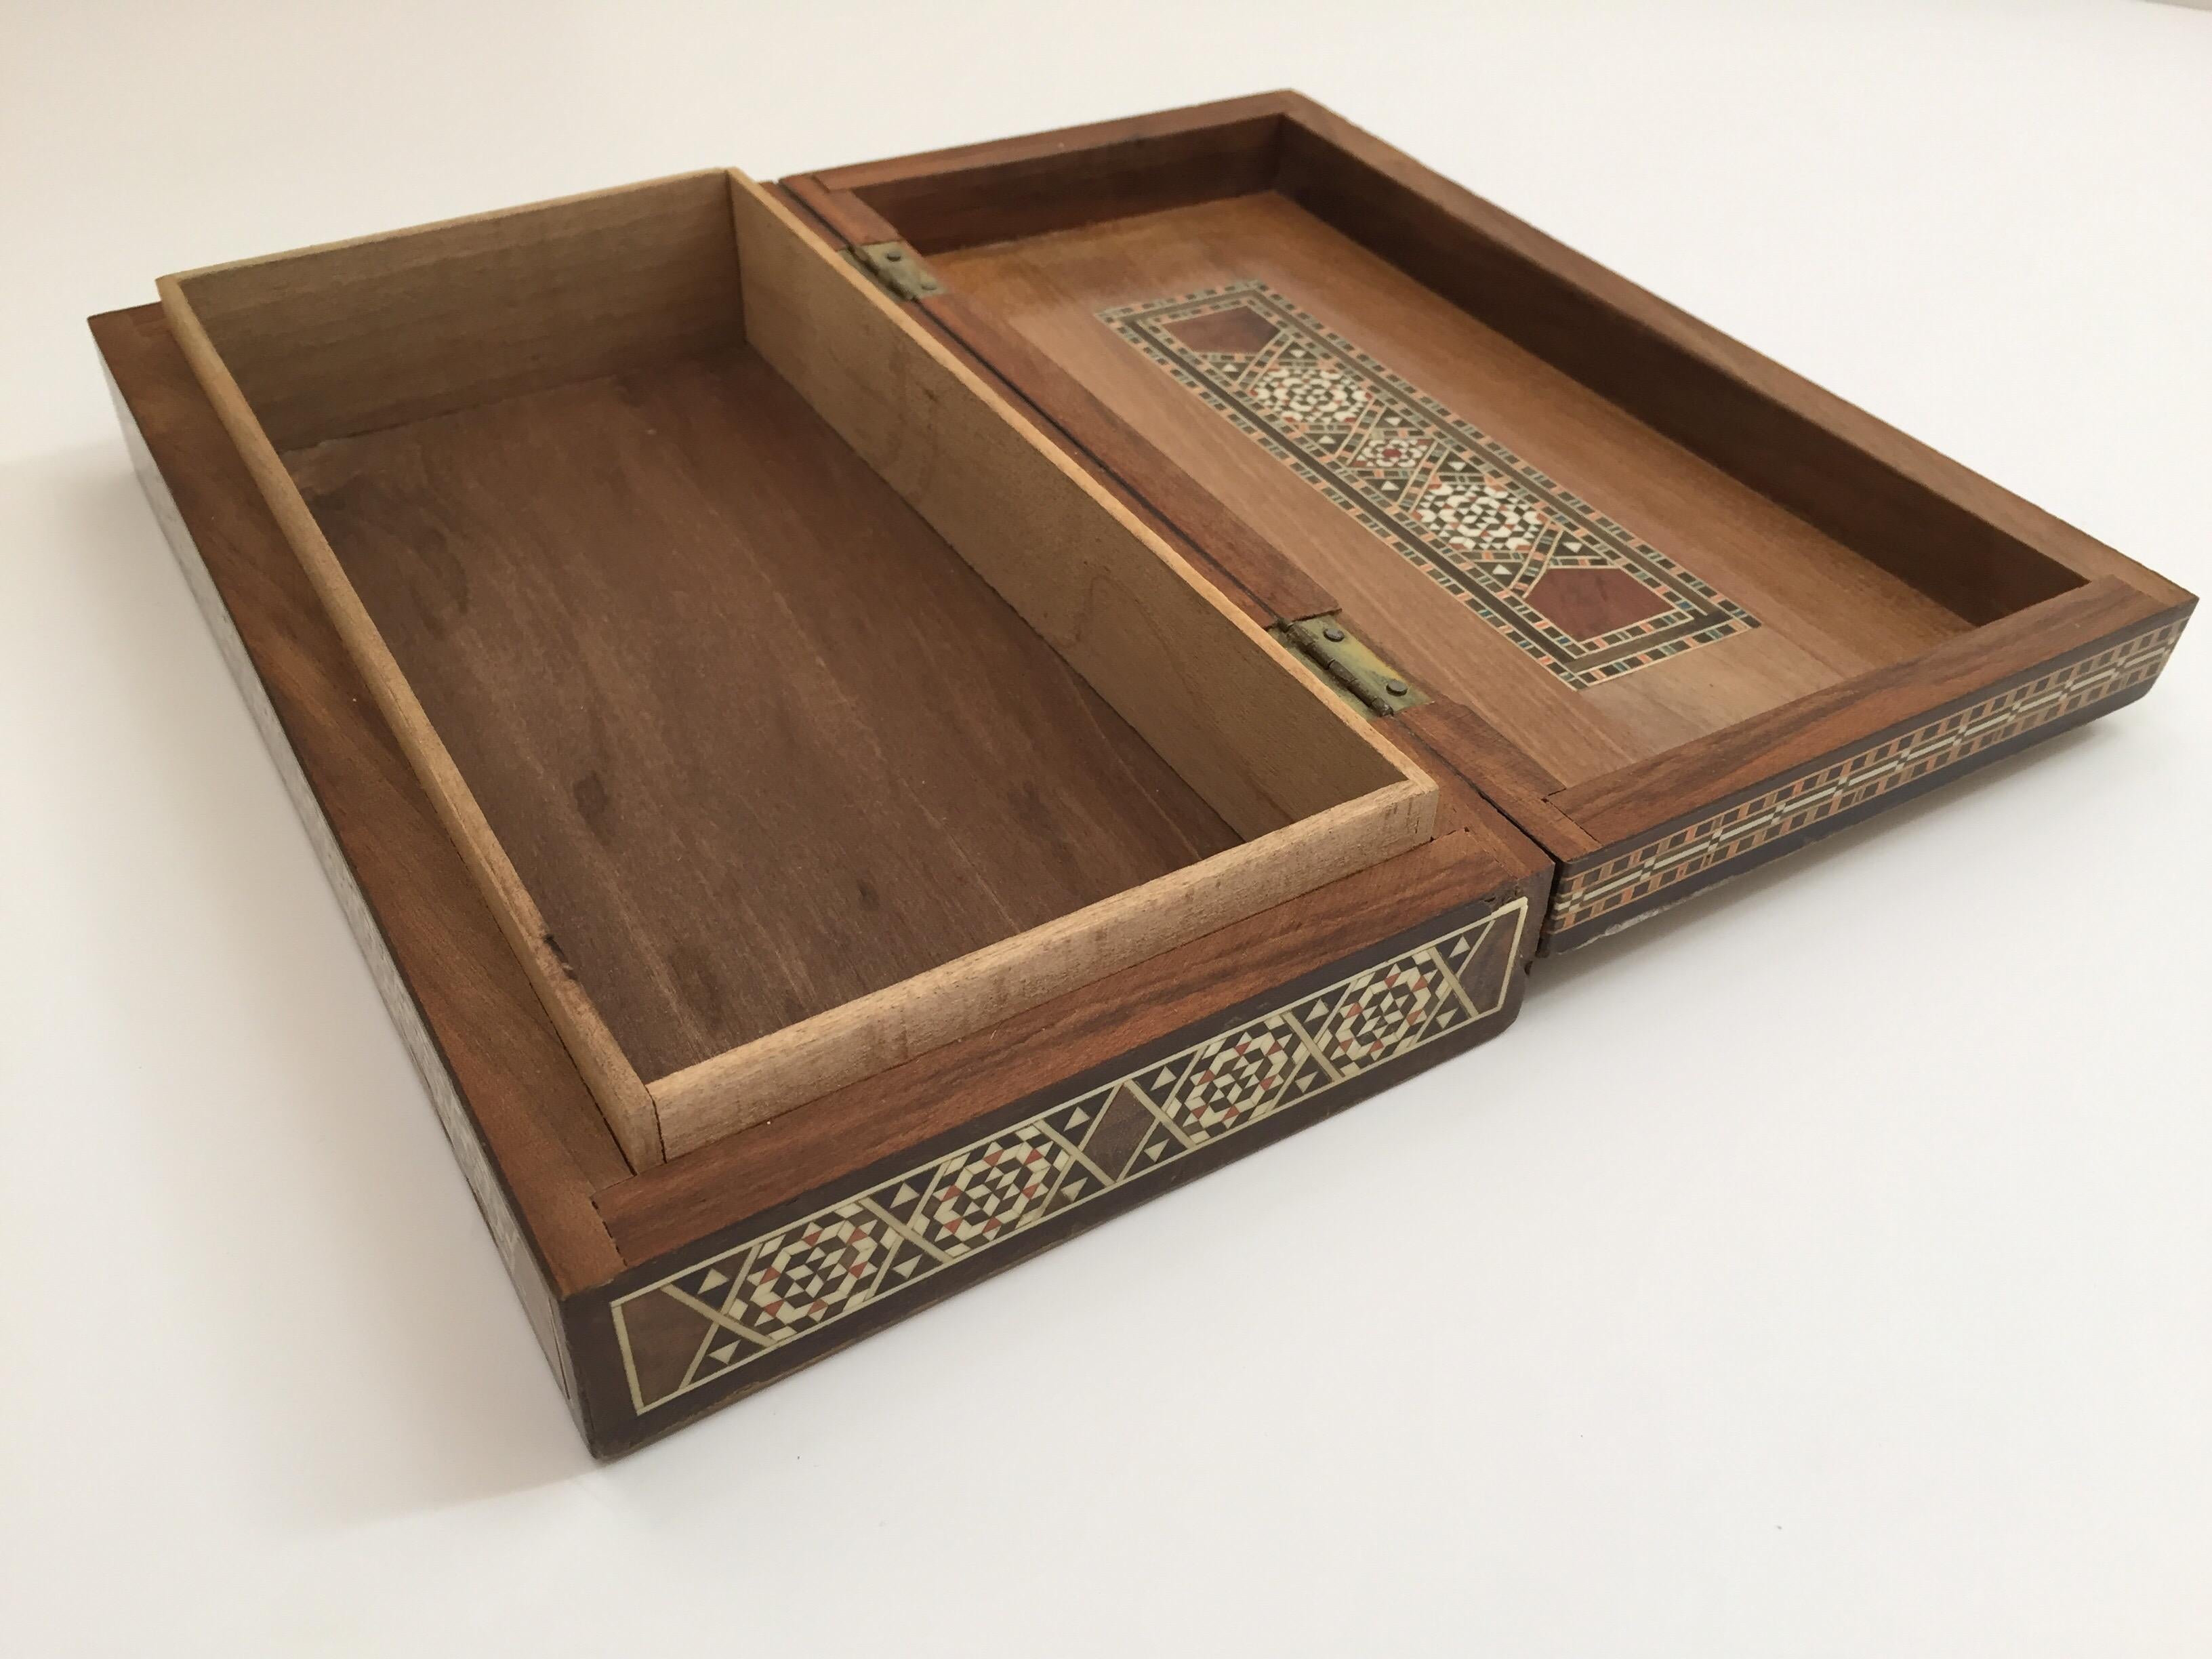 MOSAIC WOODEN JEWELLERY AND ACCESSORIES GIFIT BOX SYRIA CITYS  علب موزييك 